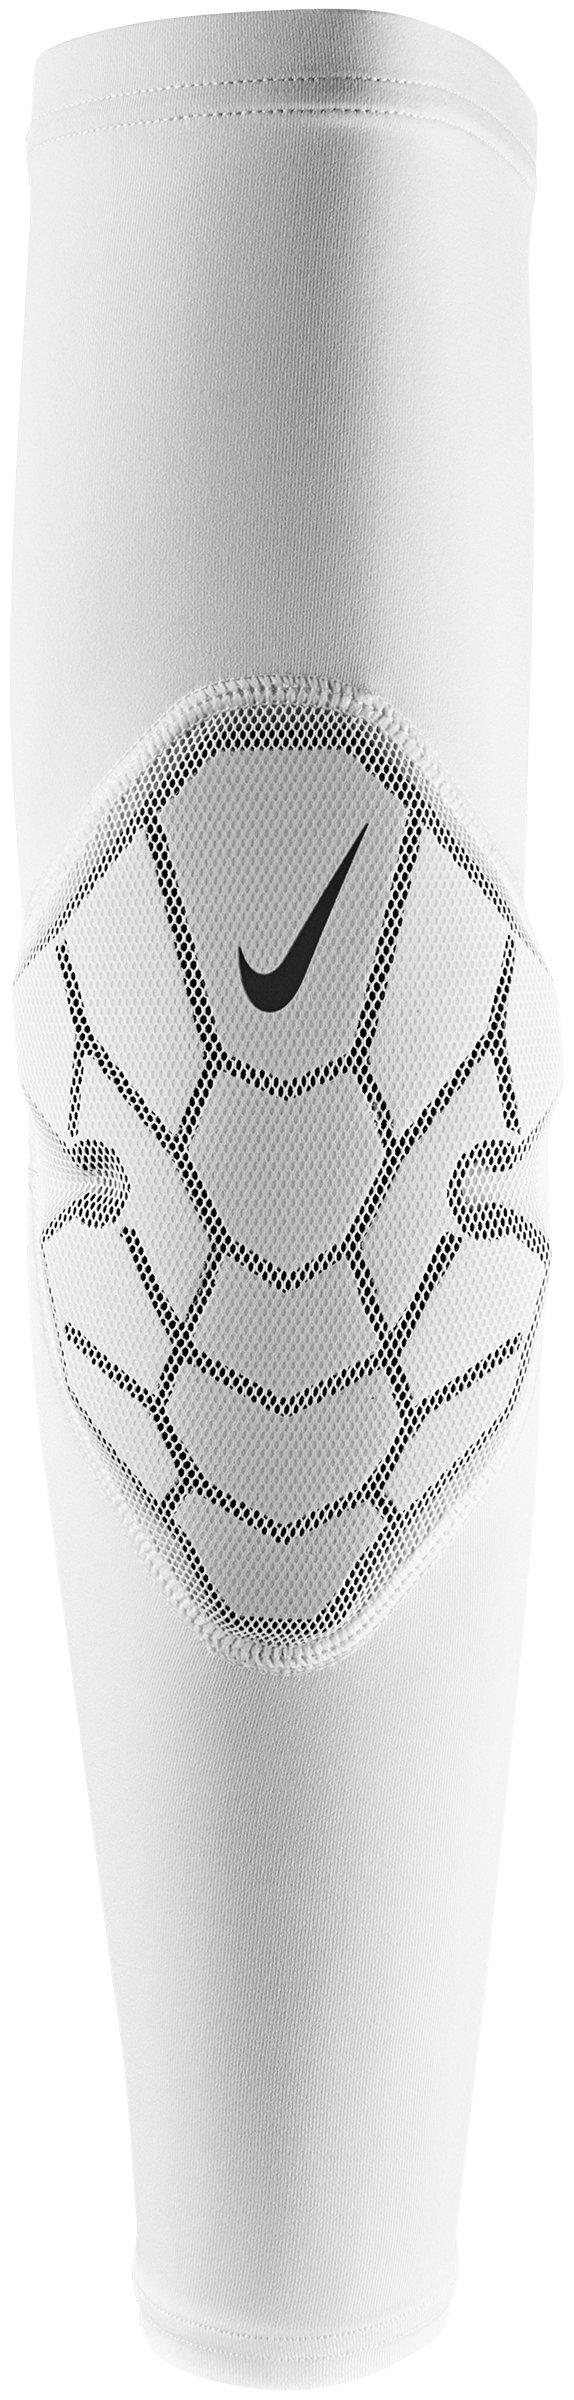 Nike Pro Hyperstrong Padded Bicep Sleeves Adult Unisex XXL/3XL White/Grey  NEW $40